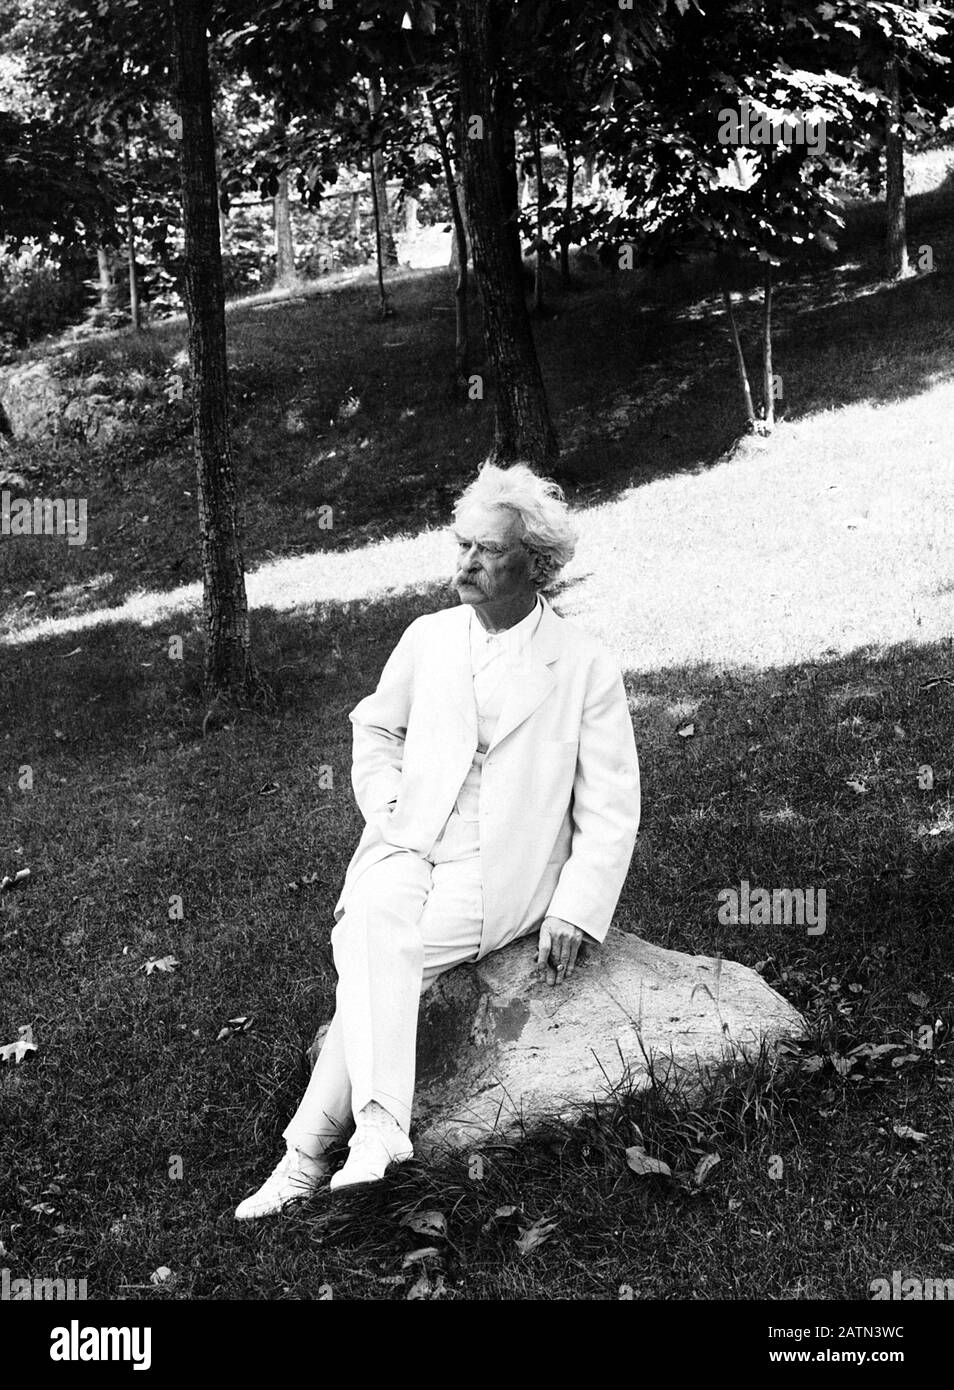 Vintage portrait photo of American writer and humourist Samuel Langhorne Clemens (1835 – 1910), better known by his pen name of Mark Twain. Photo circa 1907 by Underwood & Underwood. Stock Photo